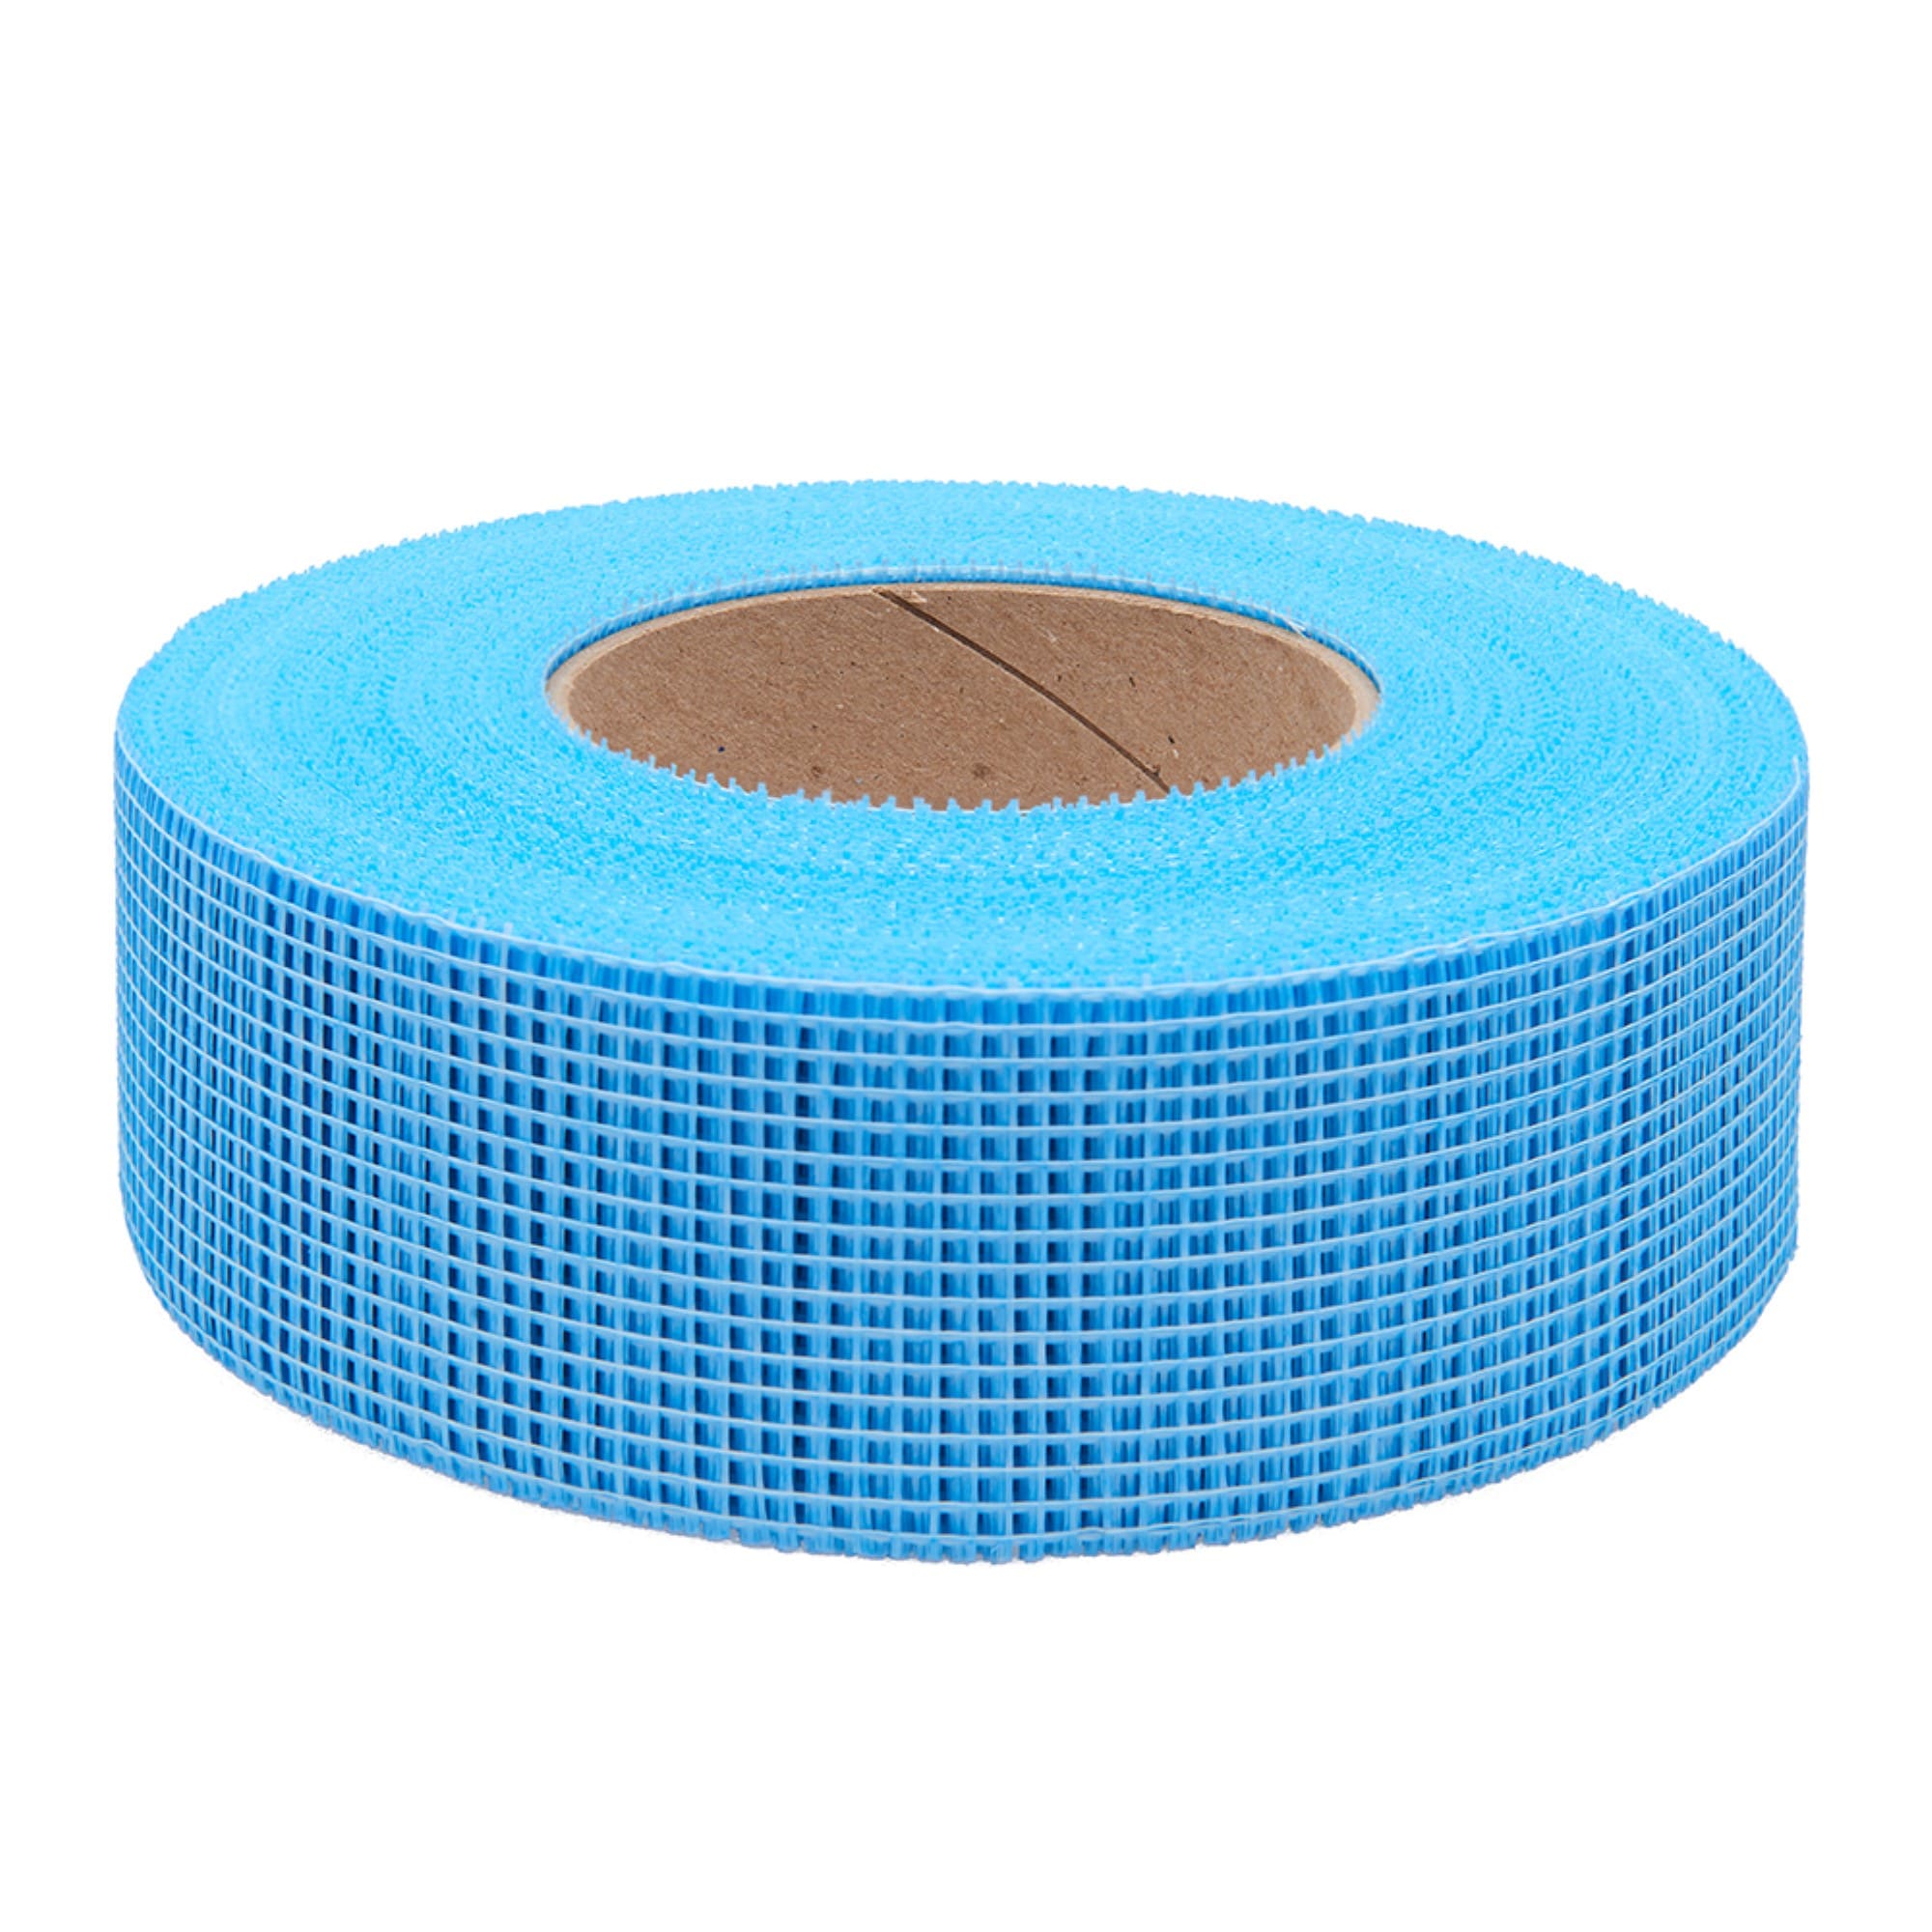 Drywall Joint Tape Drywall Joint Self Adhesive Tape，Self-Adhesive  Fiberglass Drywall Mesh Tape Heavy-Duty Self-Adhesive